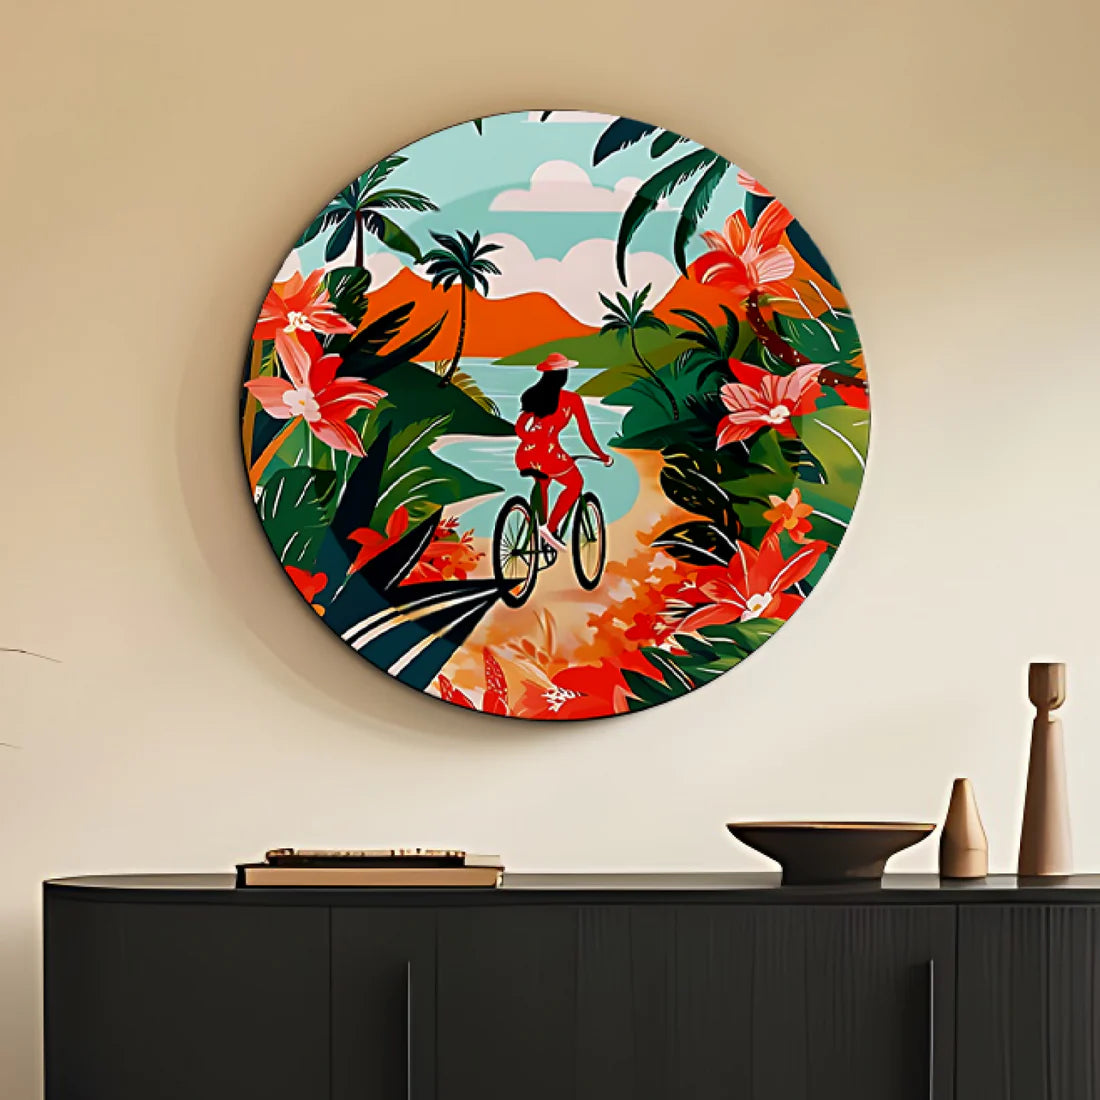 Women Riding Bicycle Ceramic Wall Plate Home Décor